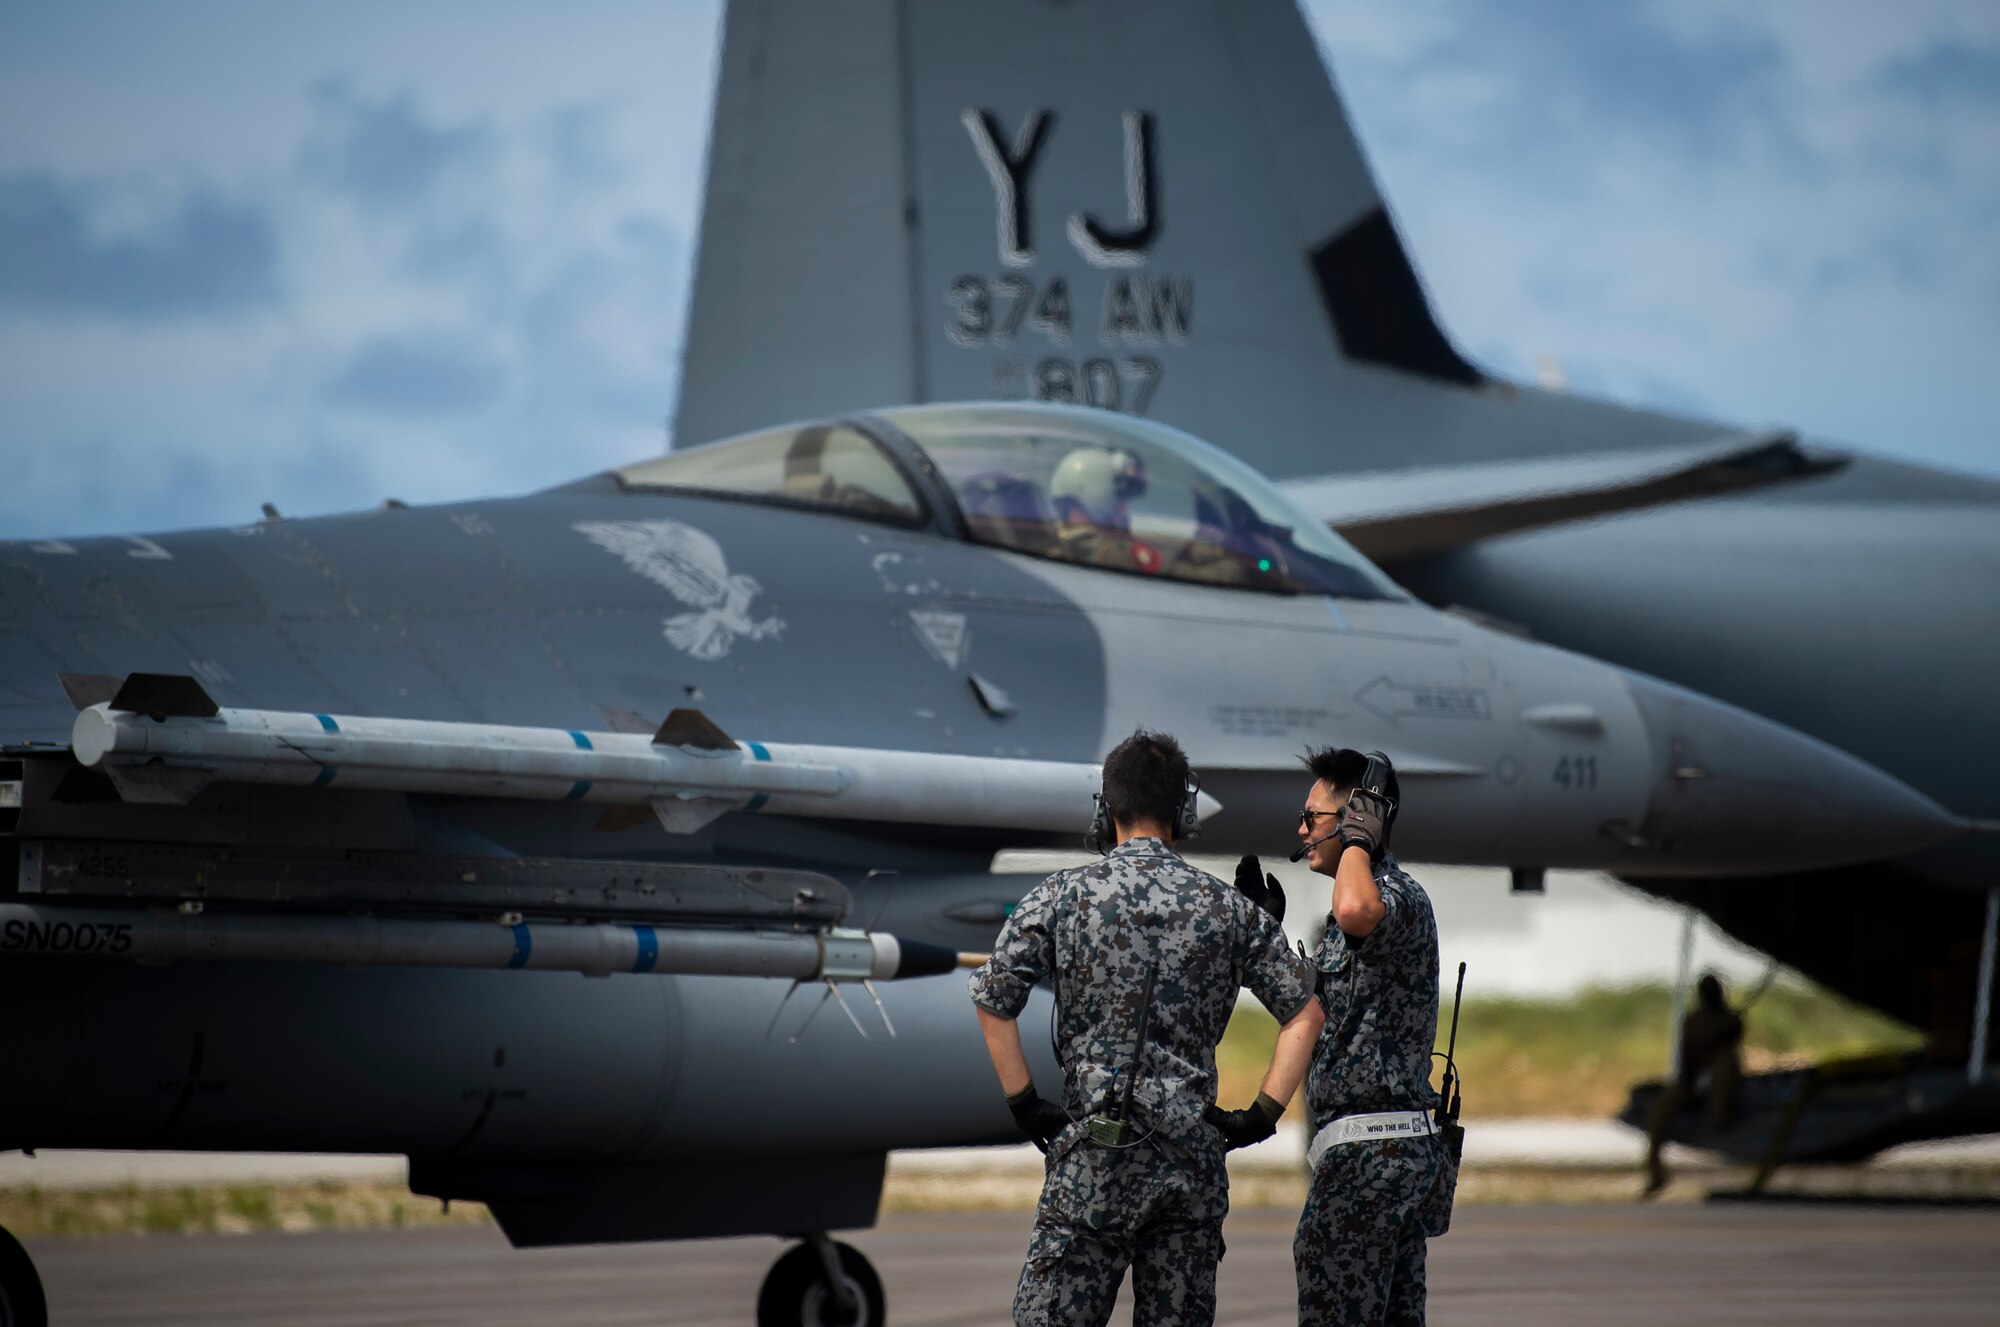 More than 230 Airmen and 15 F-16’s from the 35th Fighter Wing forward deployed to Andersen Air Force Base, Guam, as the lead wing for Cope North 21 (CN21), Feb. 3-19.